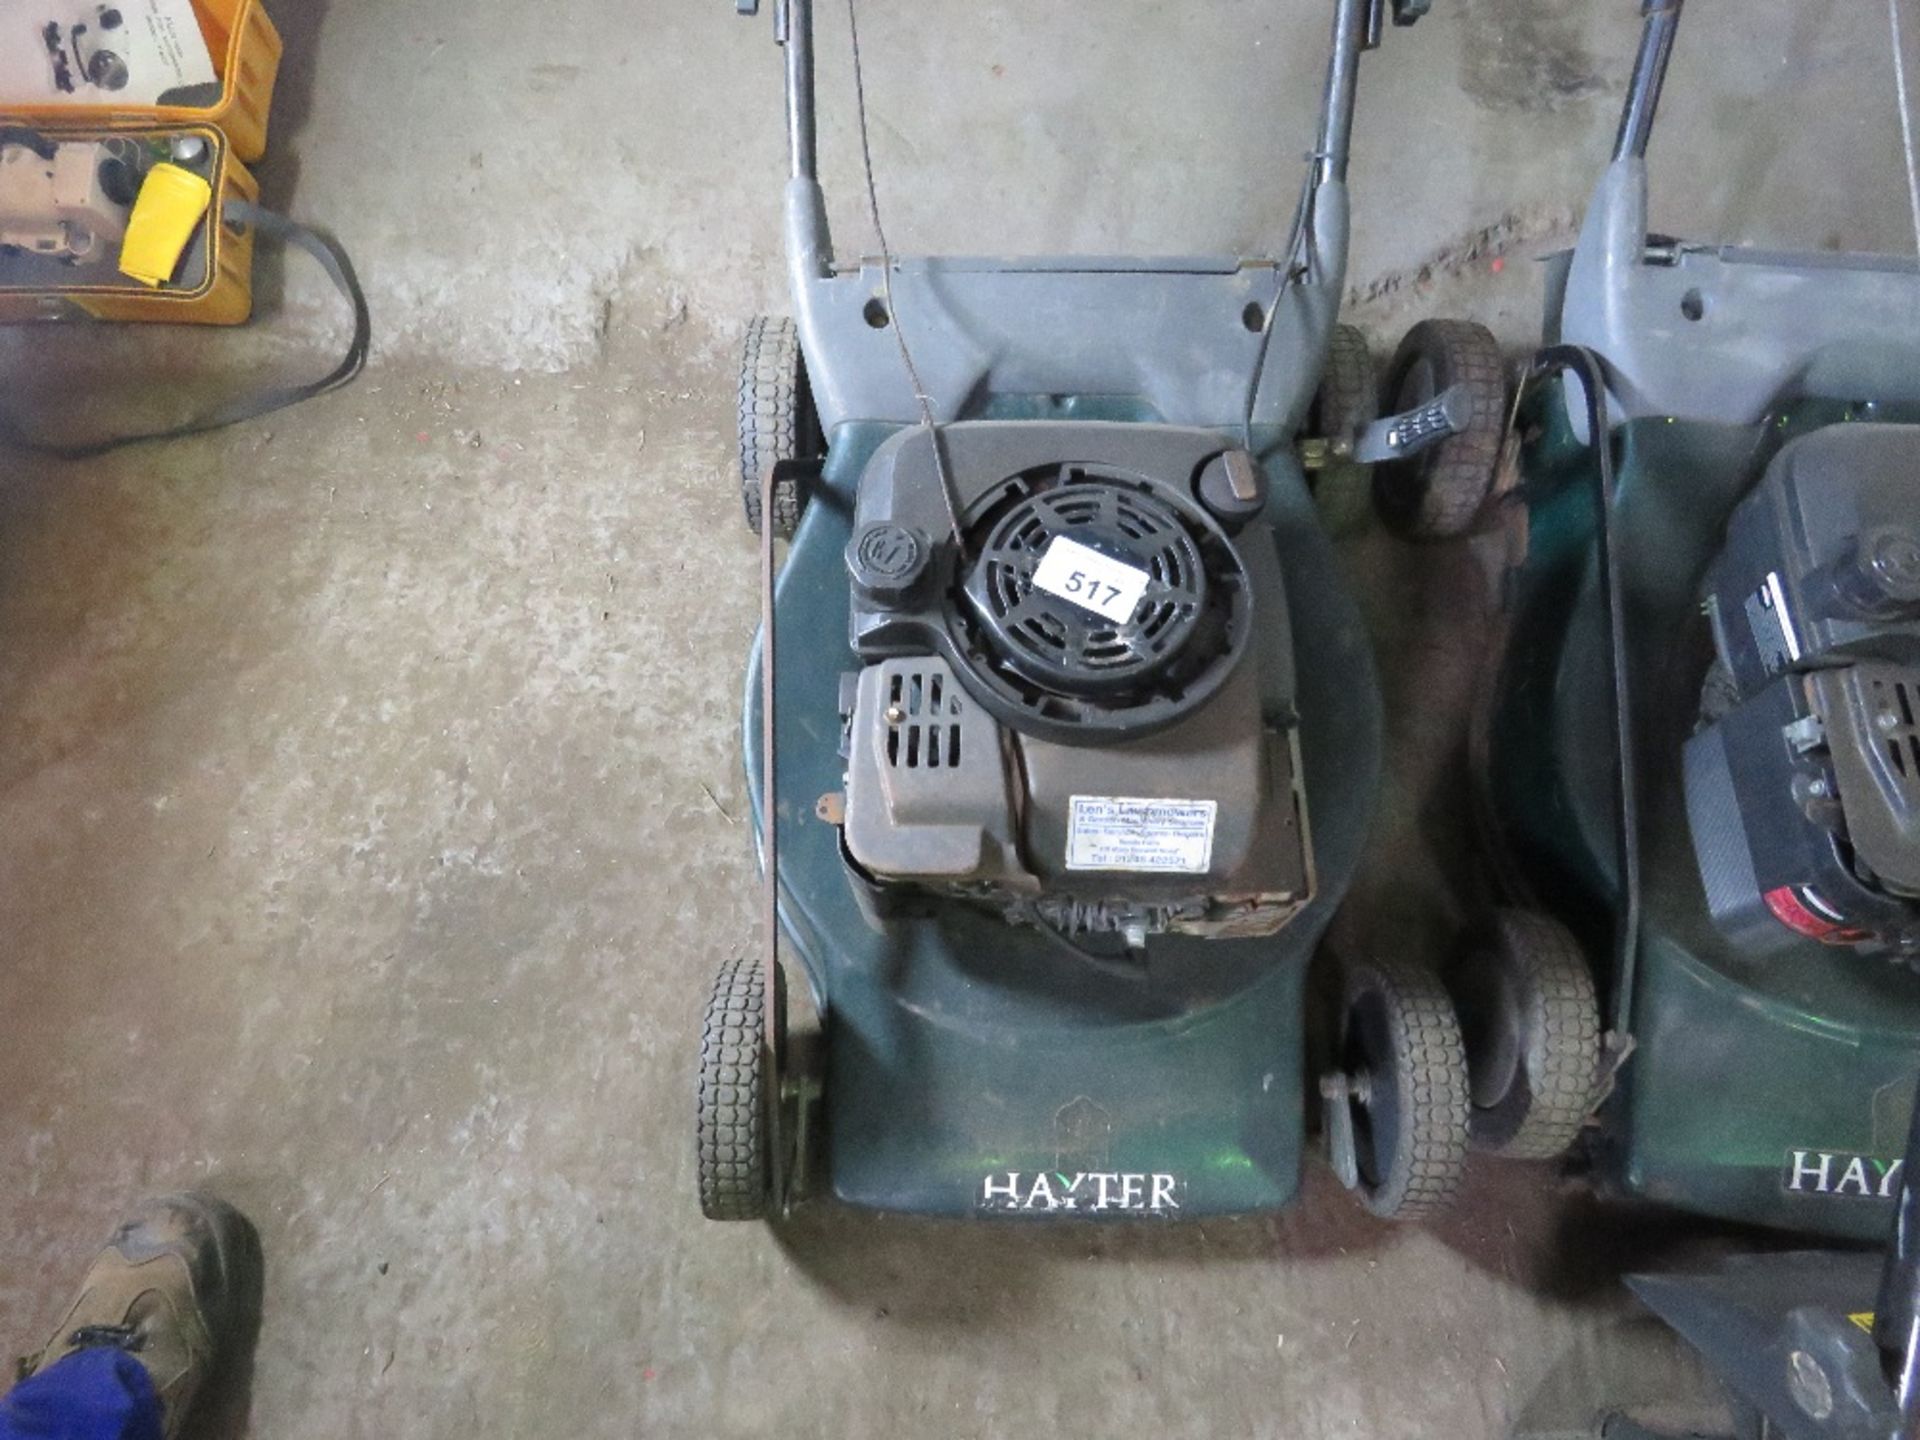 HAYTER PETROL ENGINED LAWNMOWER. THIS LOT IS SOLD UNDER THE AUCTIONEERS MARGIN SCHEME, THEREFORE NO - Image 2 of 2